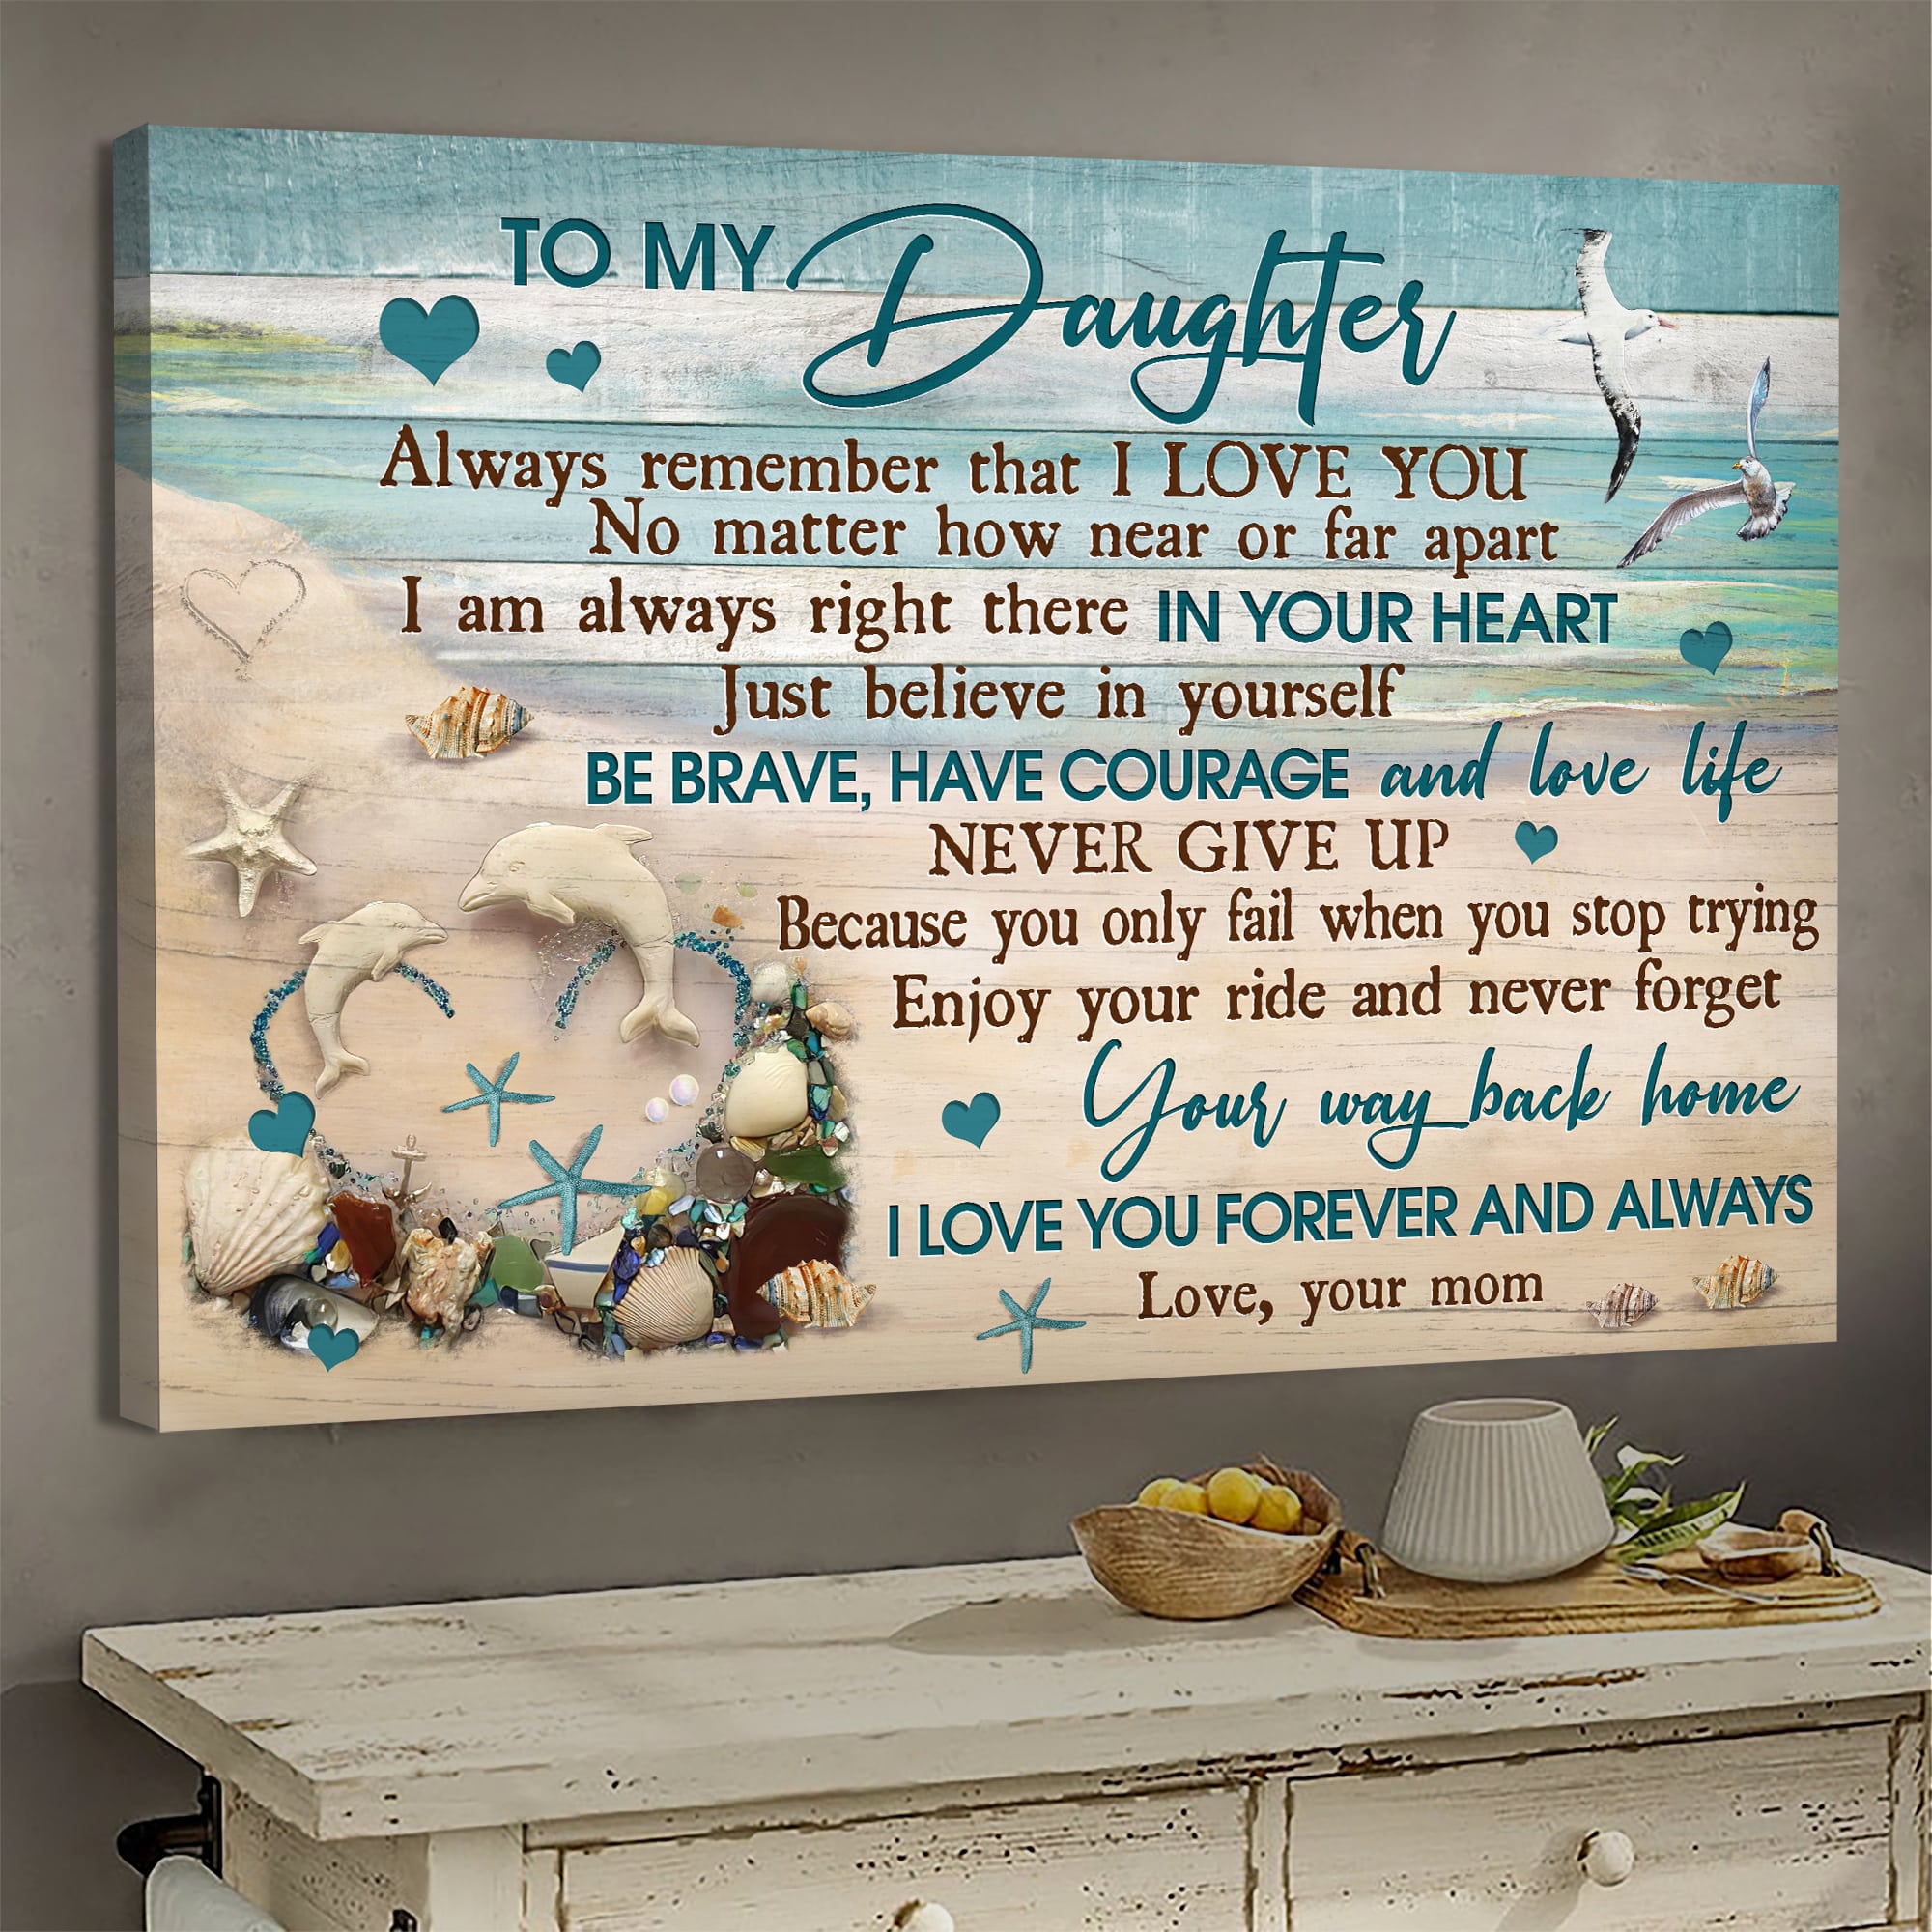 Mom to daughter, Beach drawing, White dolphin, I'm always right there in your heart - Family Landscape Canvas Prints, Wall Art